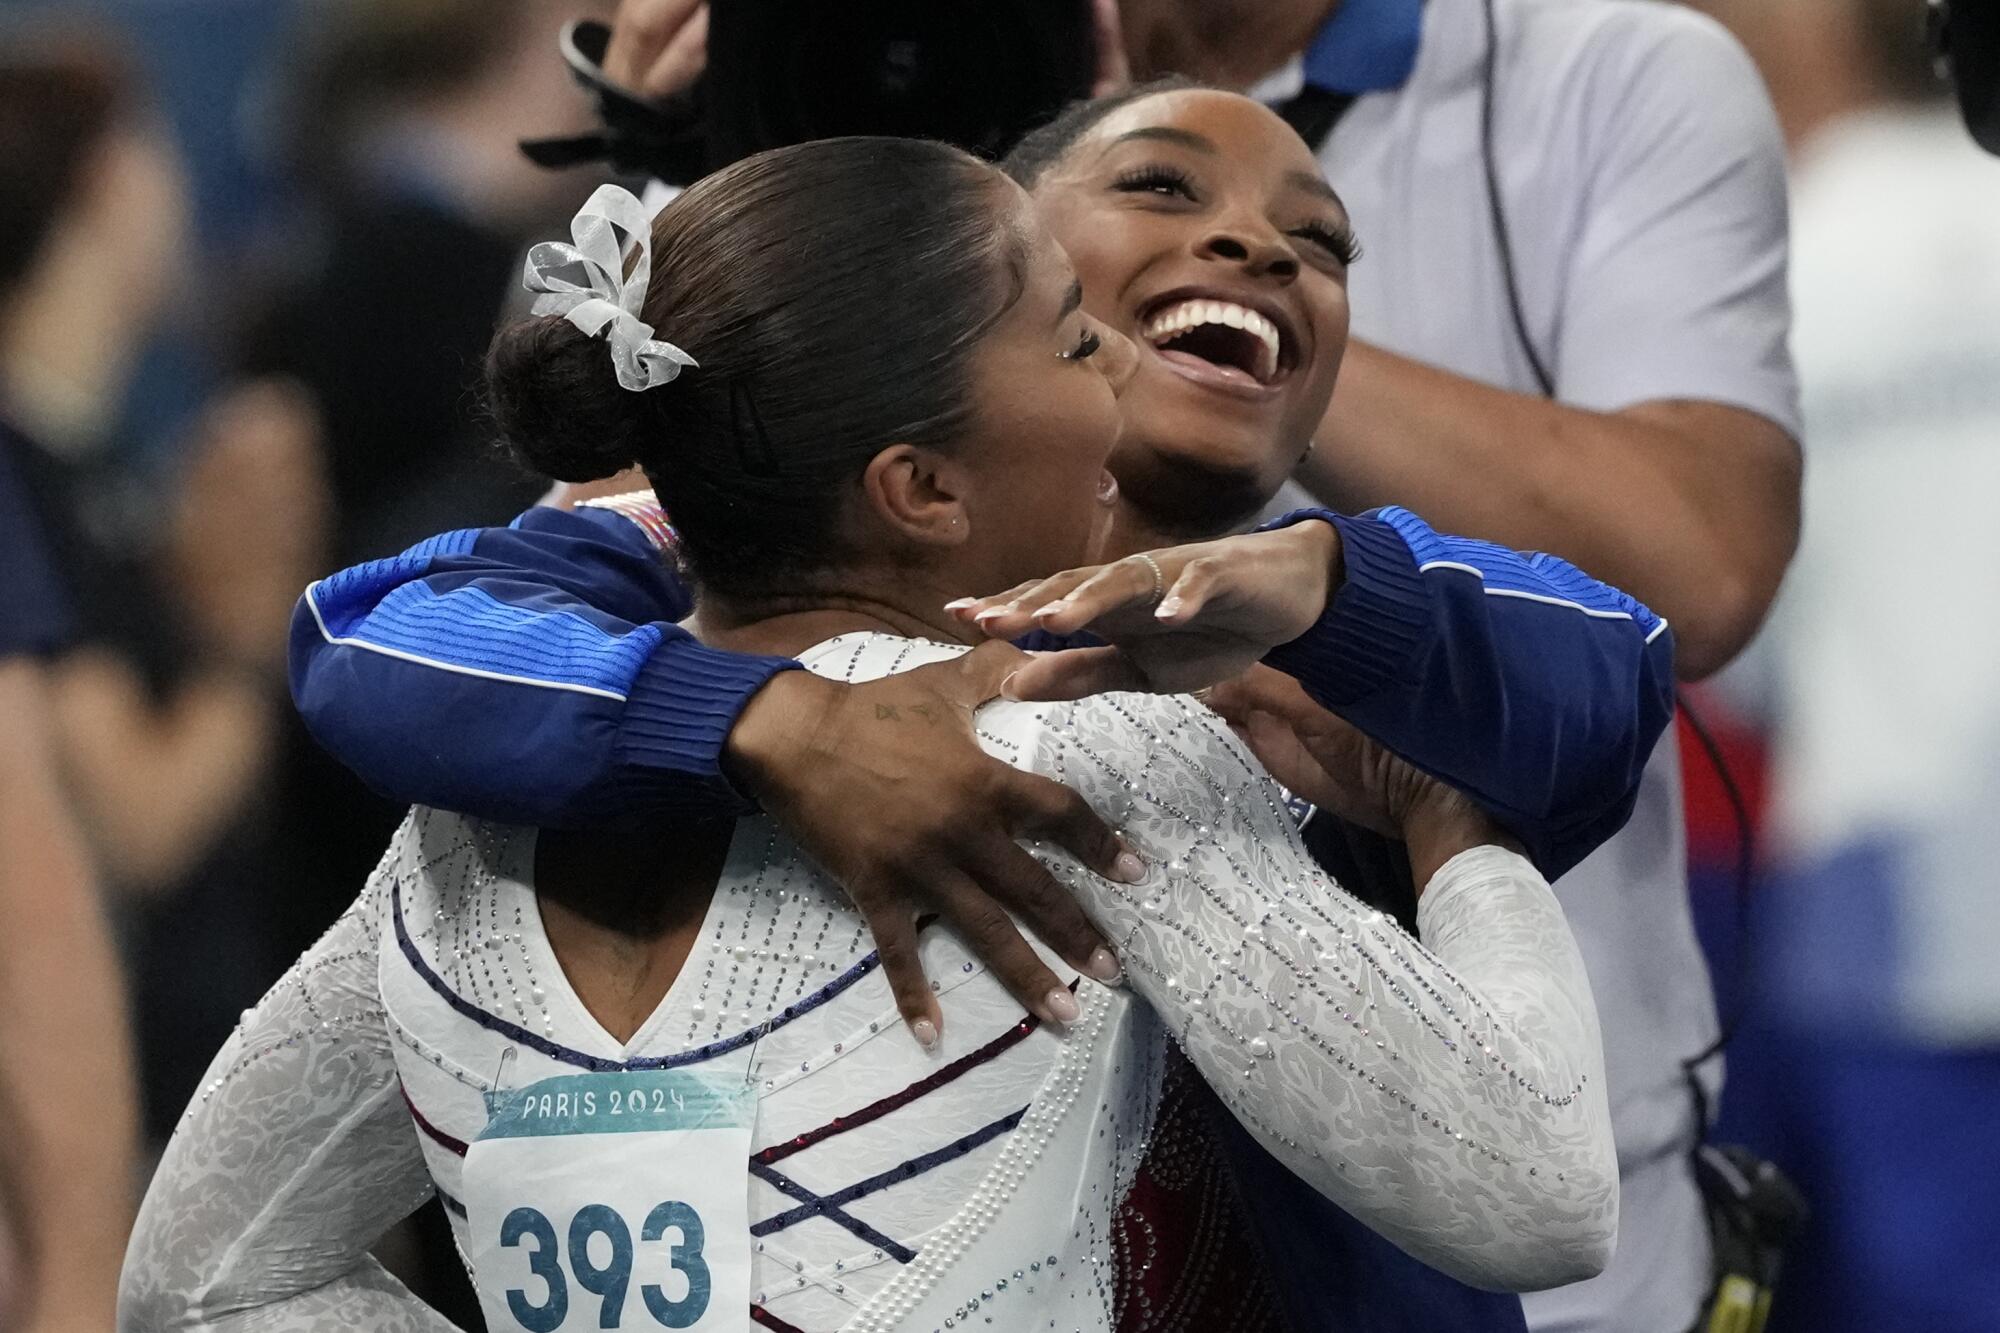 U.S. gymnasts Jordan Chiles, left, celebrates with Simone Biles after they earned bronze and silver medals.